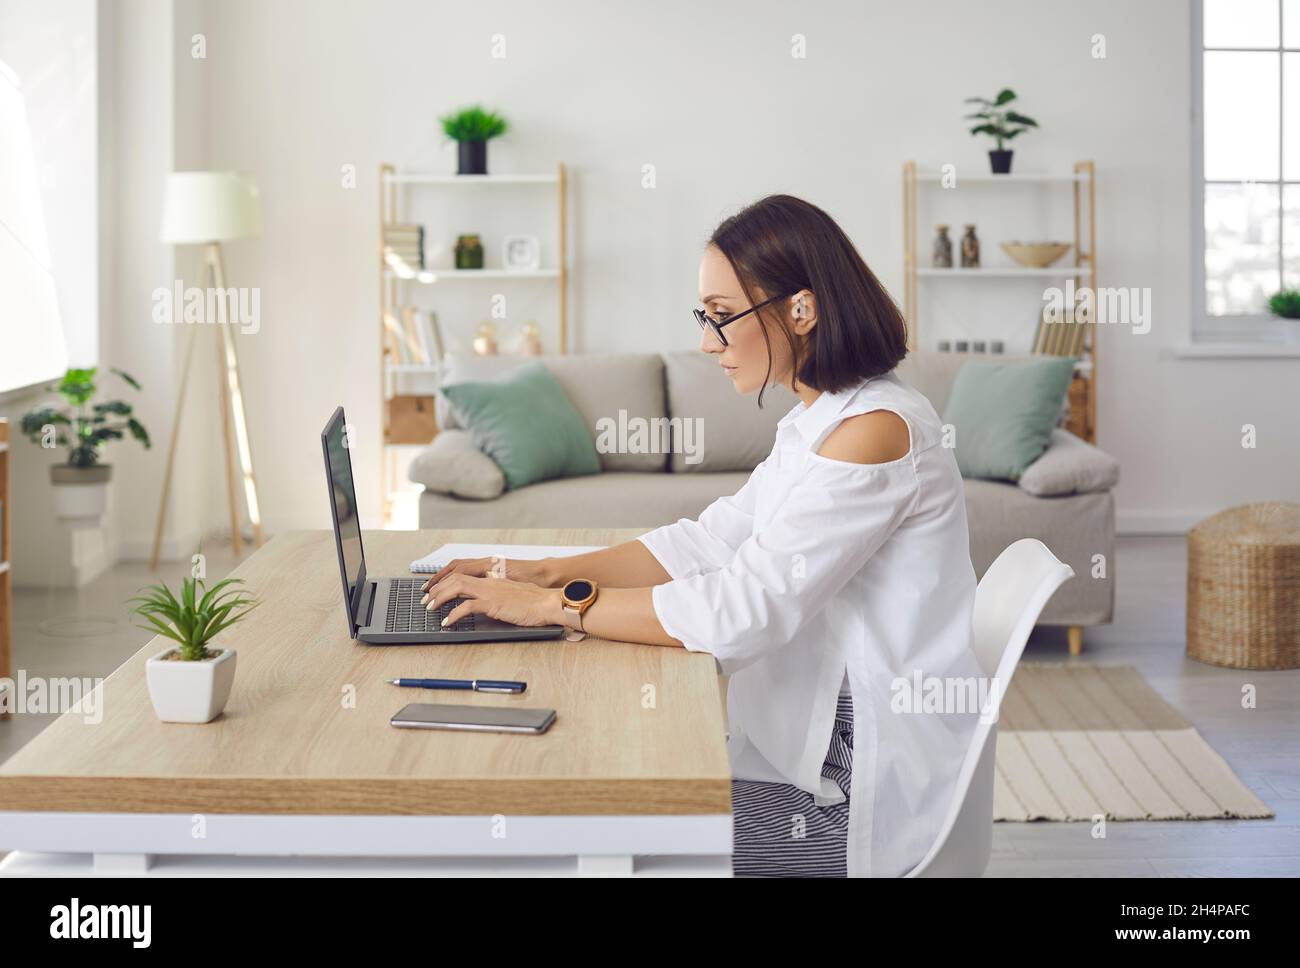 Serious, focused and dedicated woman doing business project on laptop in her home office. Stock Photo